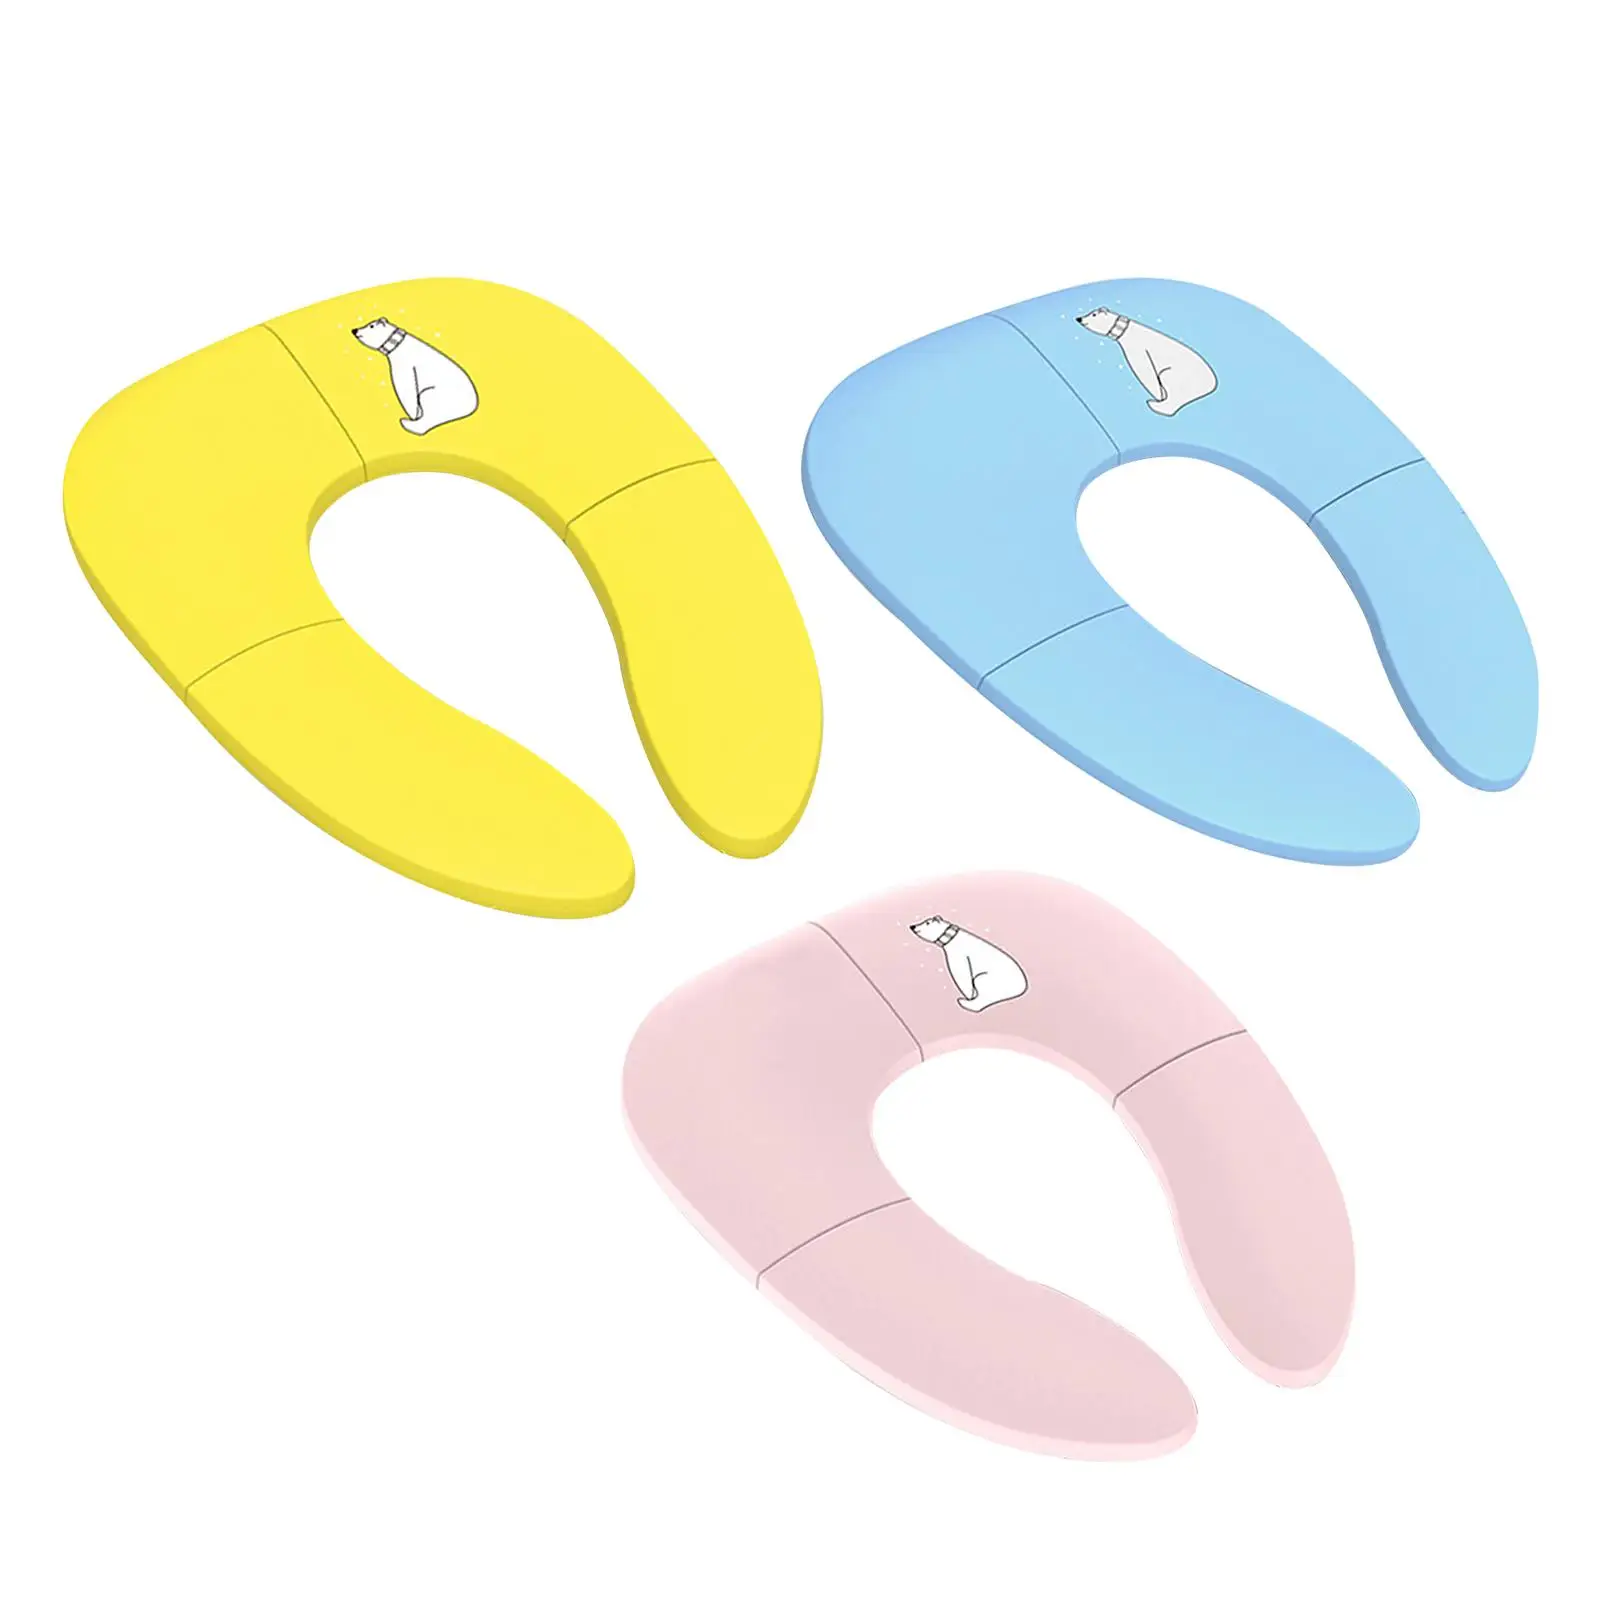 Folding Toilet pad Non Slip Potty Ring Toilet Seat pad Toilet Ring for Round and Oval Toilets Travel Child Boys Adults